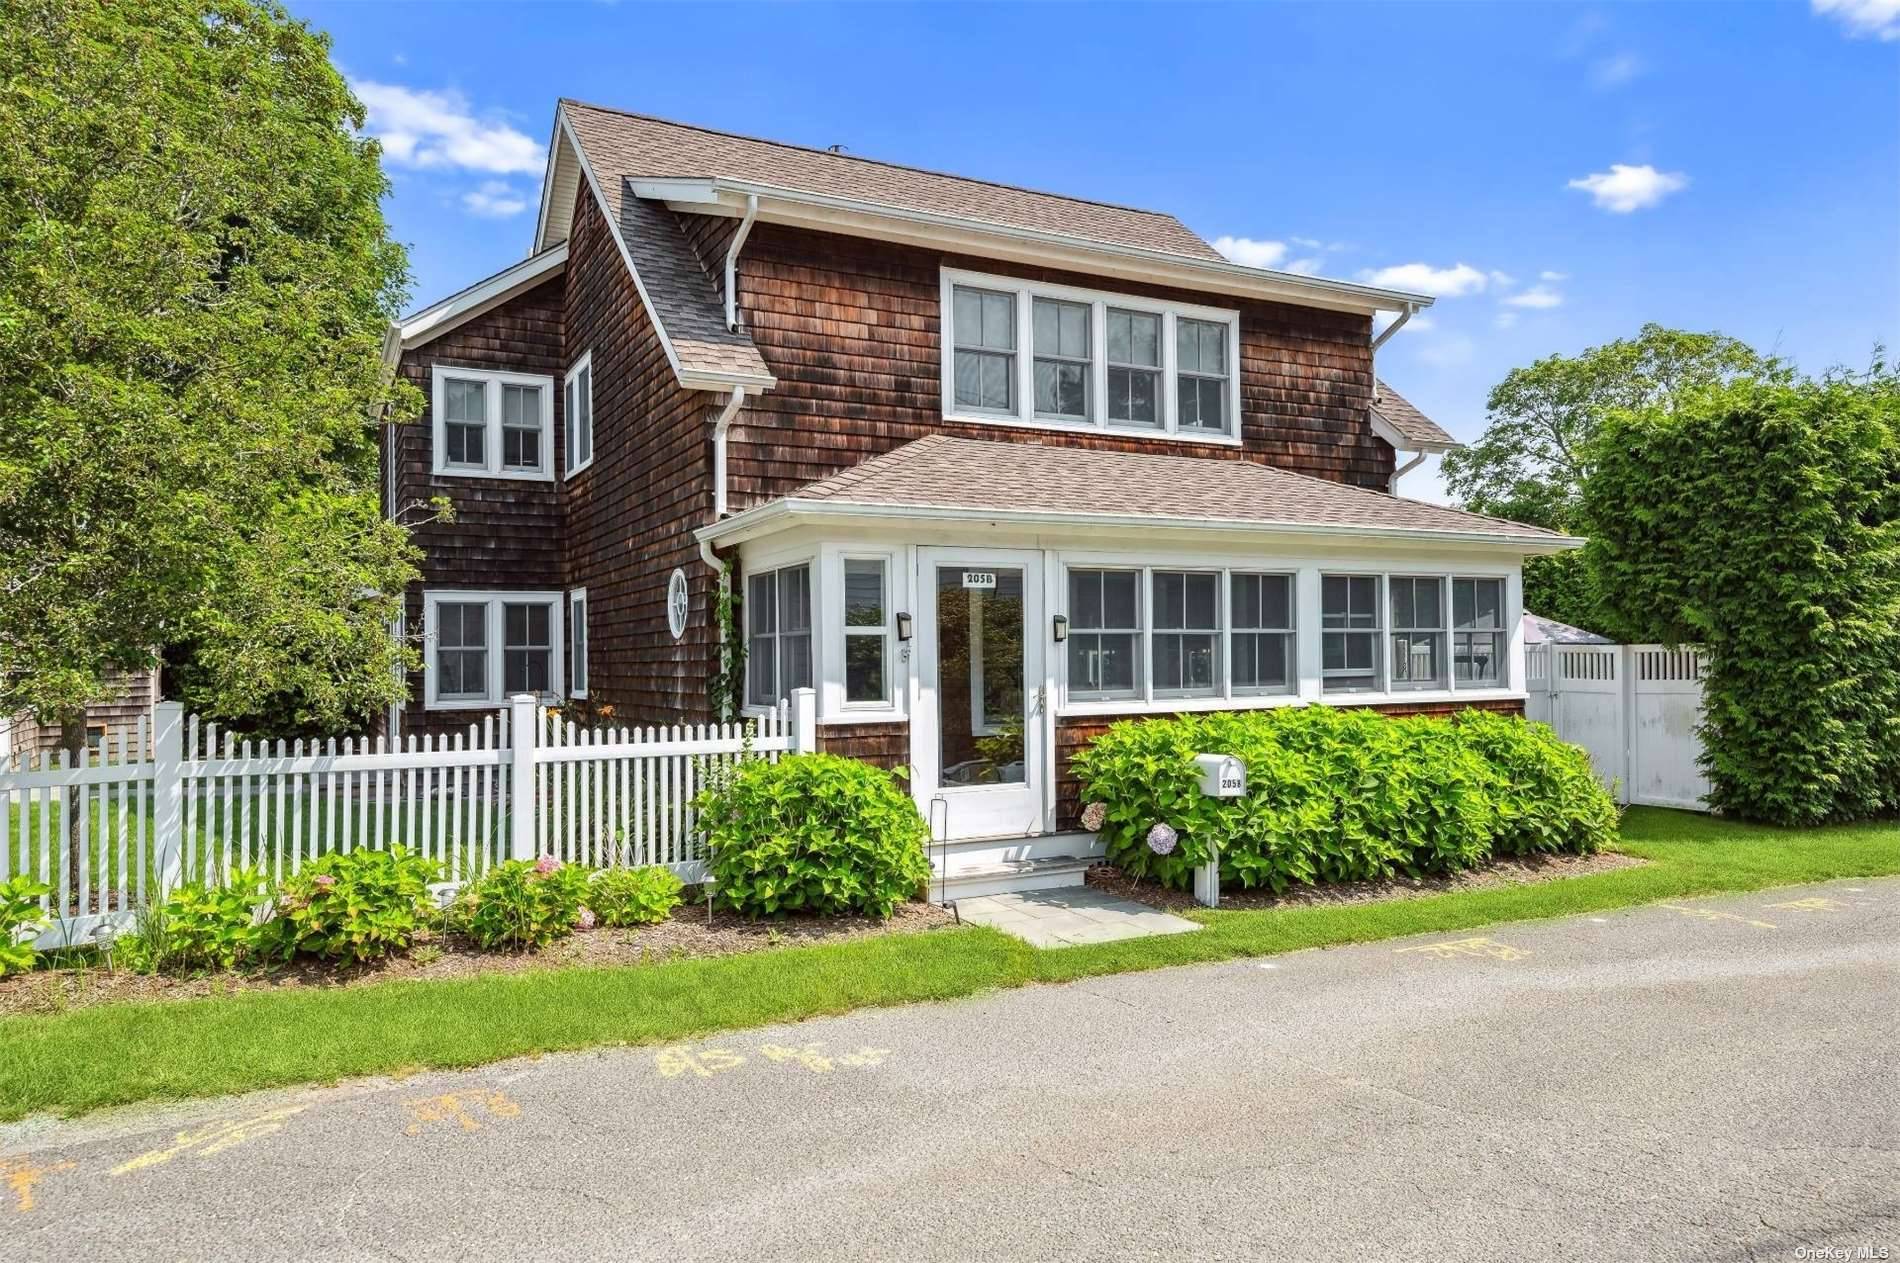 Located in a private hilltop setting in the heart of Southampton Village, this fully renovated Traditional offers 4 bedrooms and 4 baths.